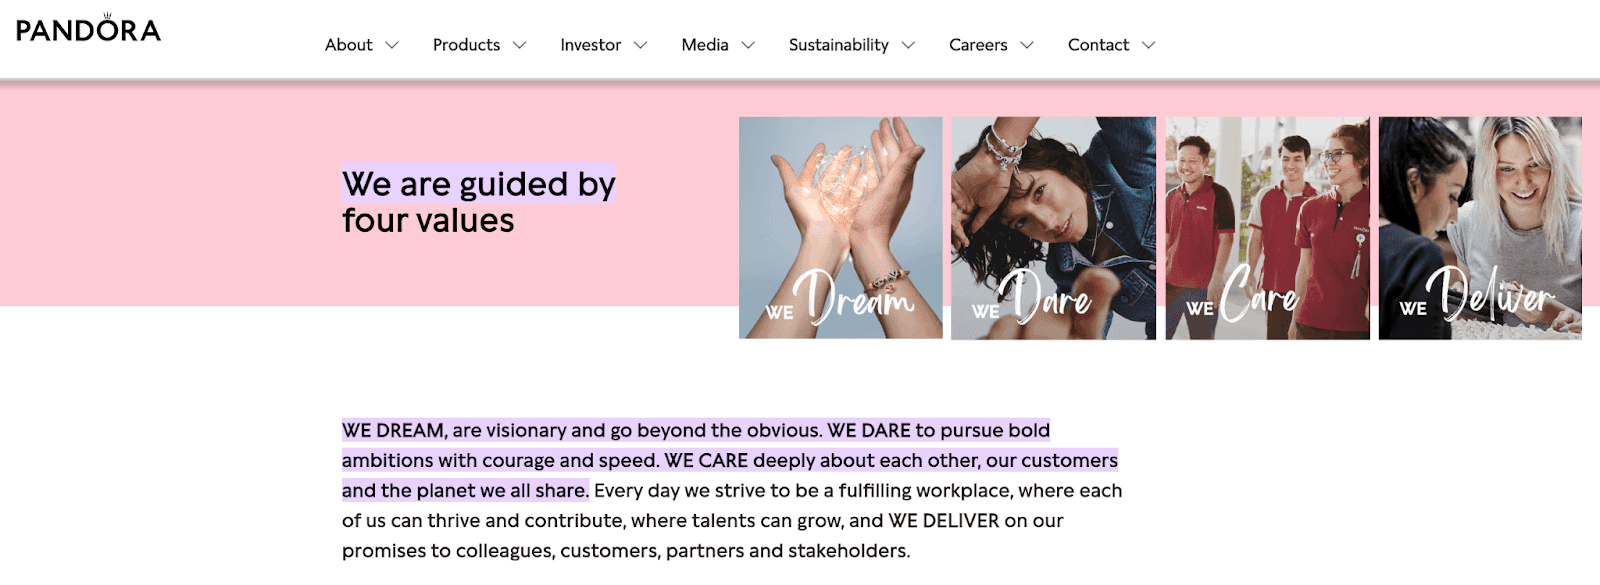 "WE DREAM, WE DARE, WE CARE, WE DELIVER" are the four listed values of Pandora.